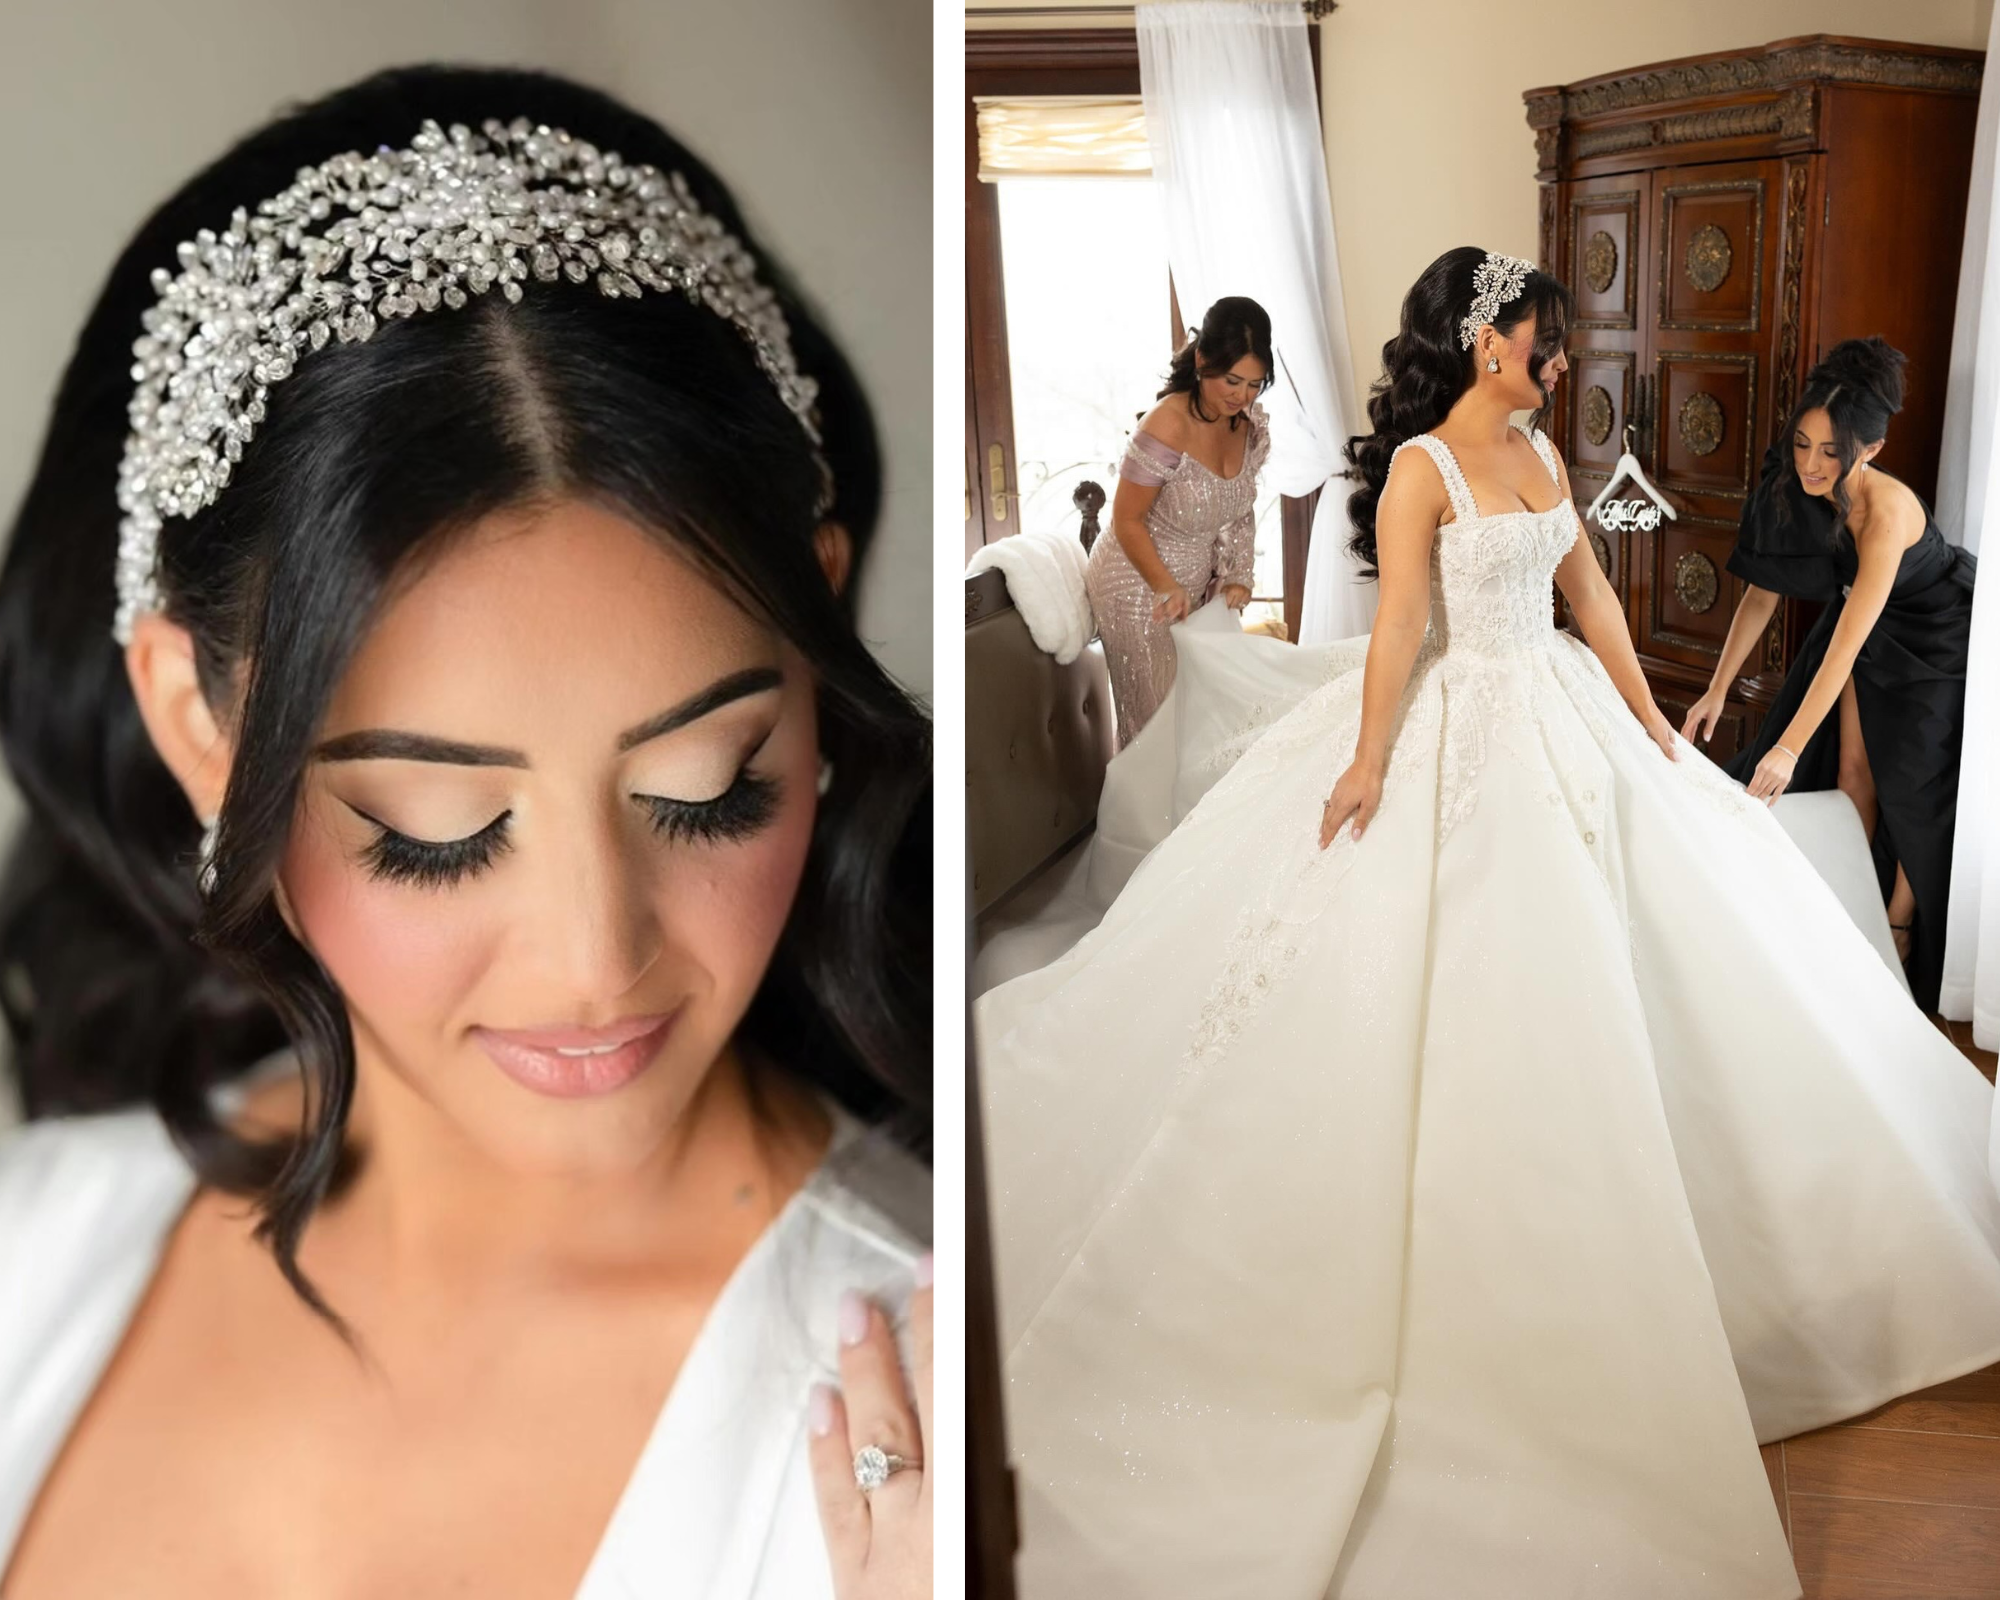 Our bride modeling her custom freshwater pearl and crystal hair vine headband and gorgeous square-necked wedding gown.